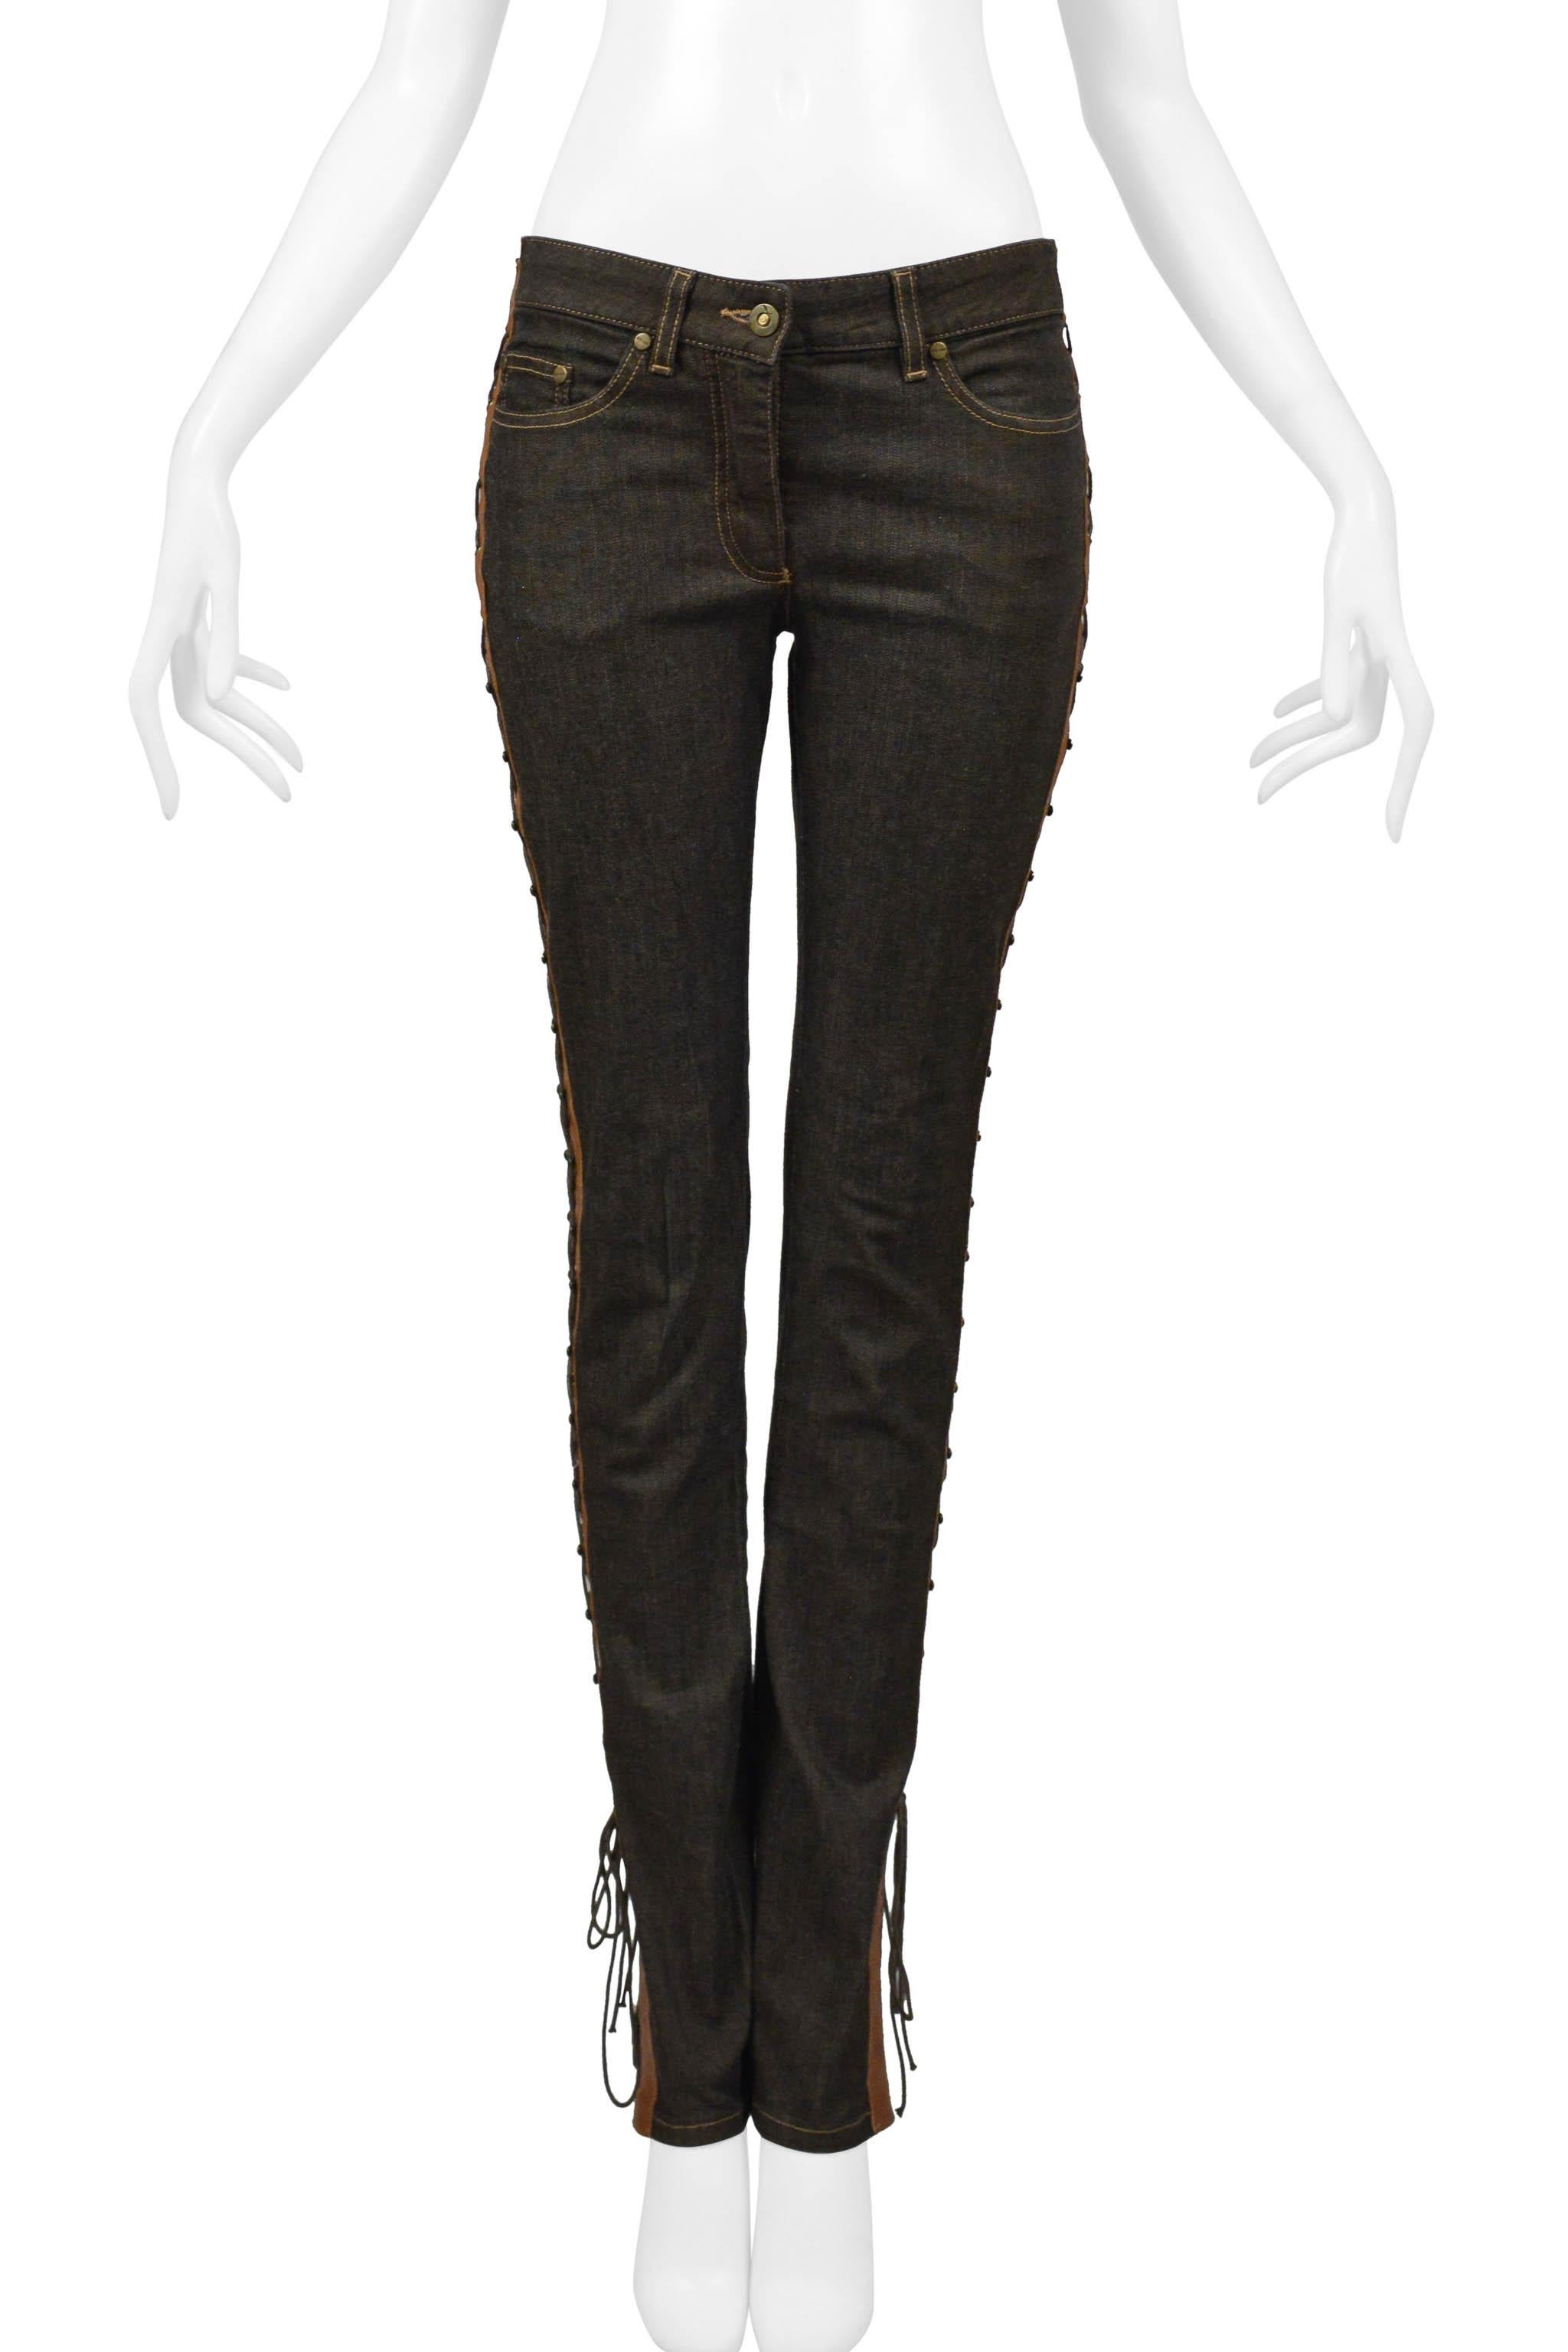 McQueen Denim Jeans With Brown Leather Corset Laced Sides 2002 For Sale 1